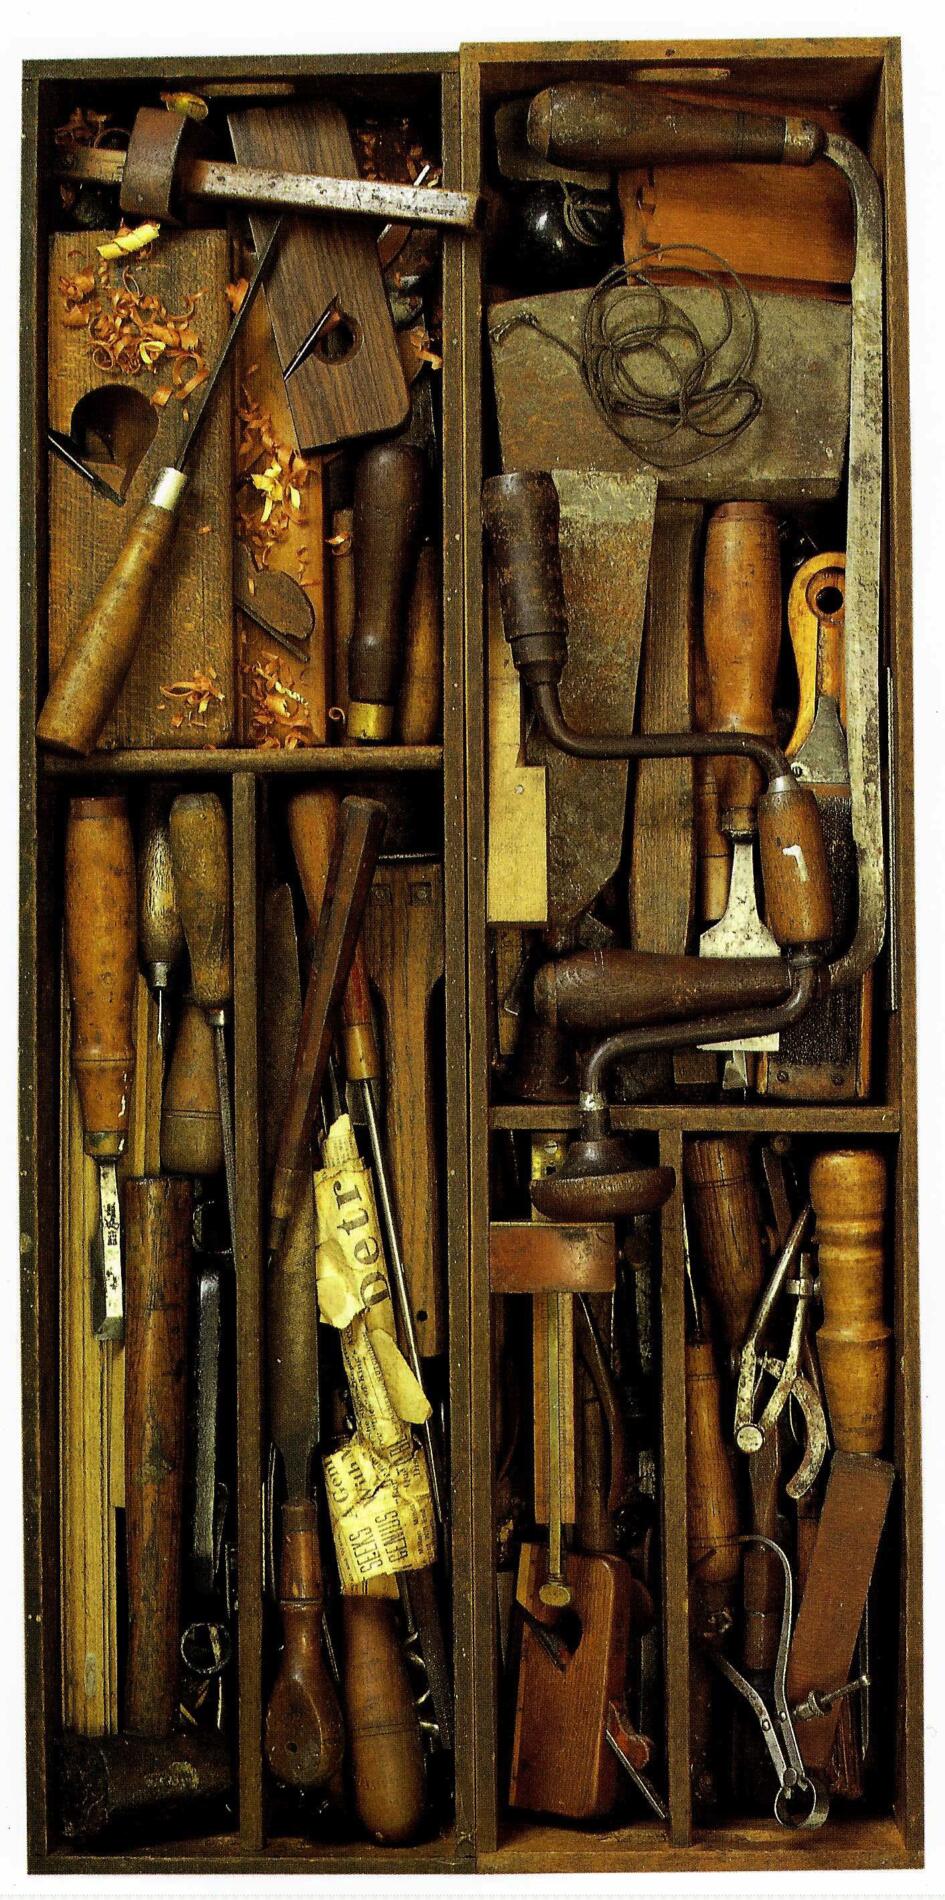 A selection of woodworking tools given to Adolph Meyer by his father. J.B. Freund, "Masterpieces of Americana: The Collection of Mr. and Mrs. Adolph Henry Meyer" (Sotheby's Books, 1995), p. 92.